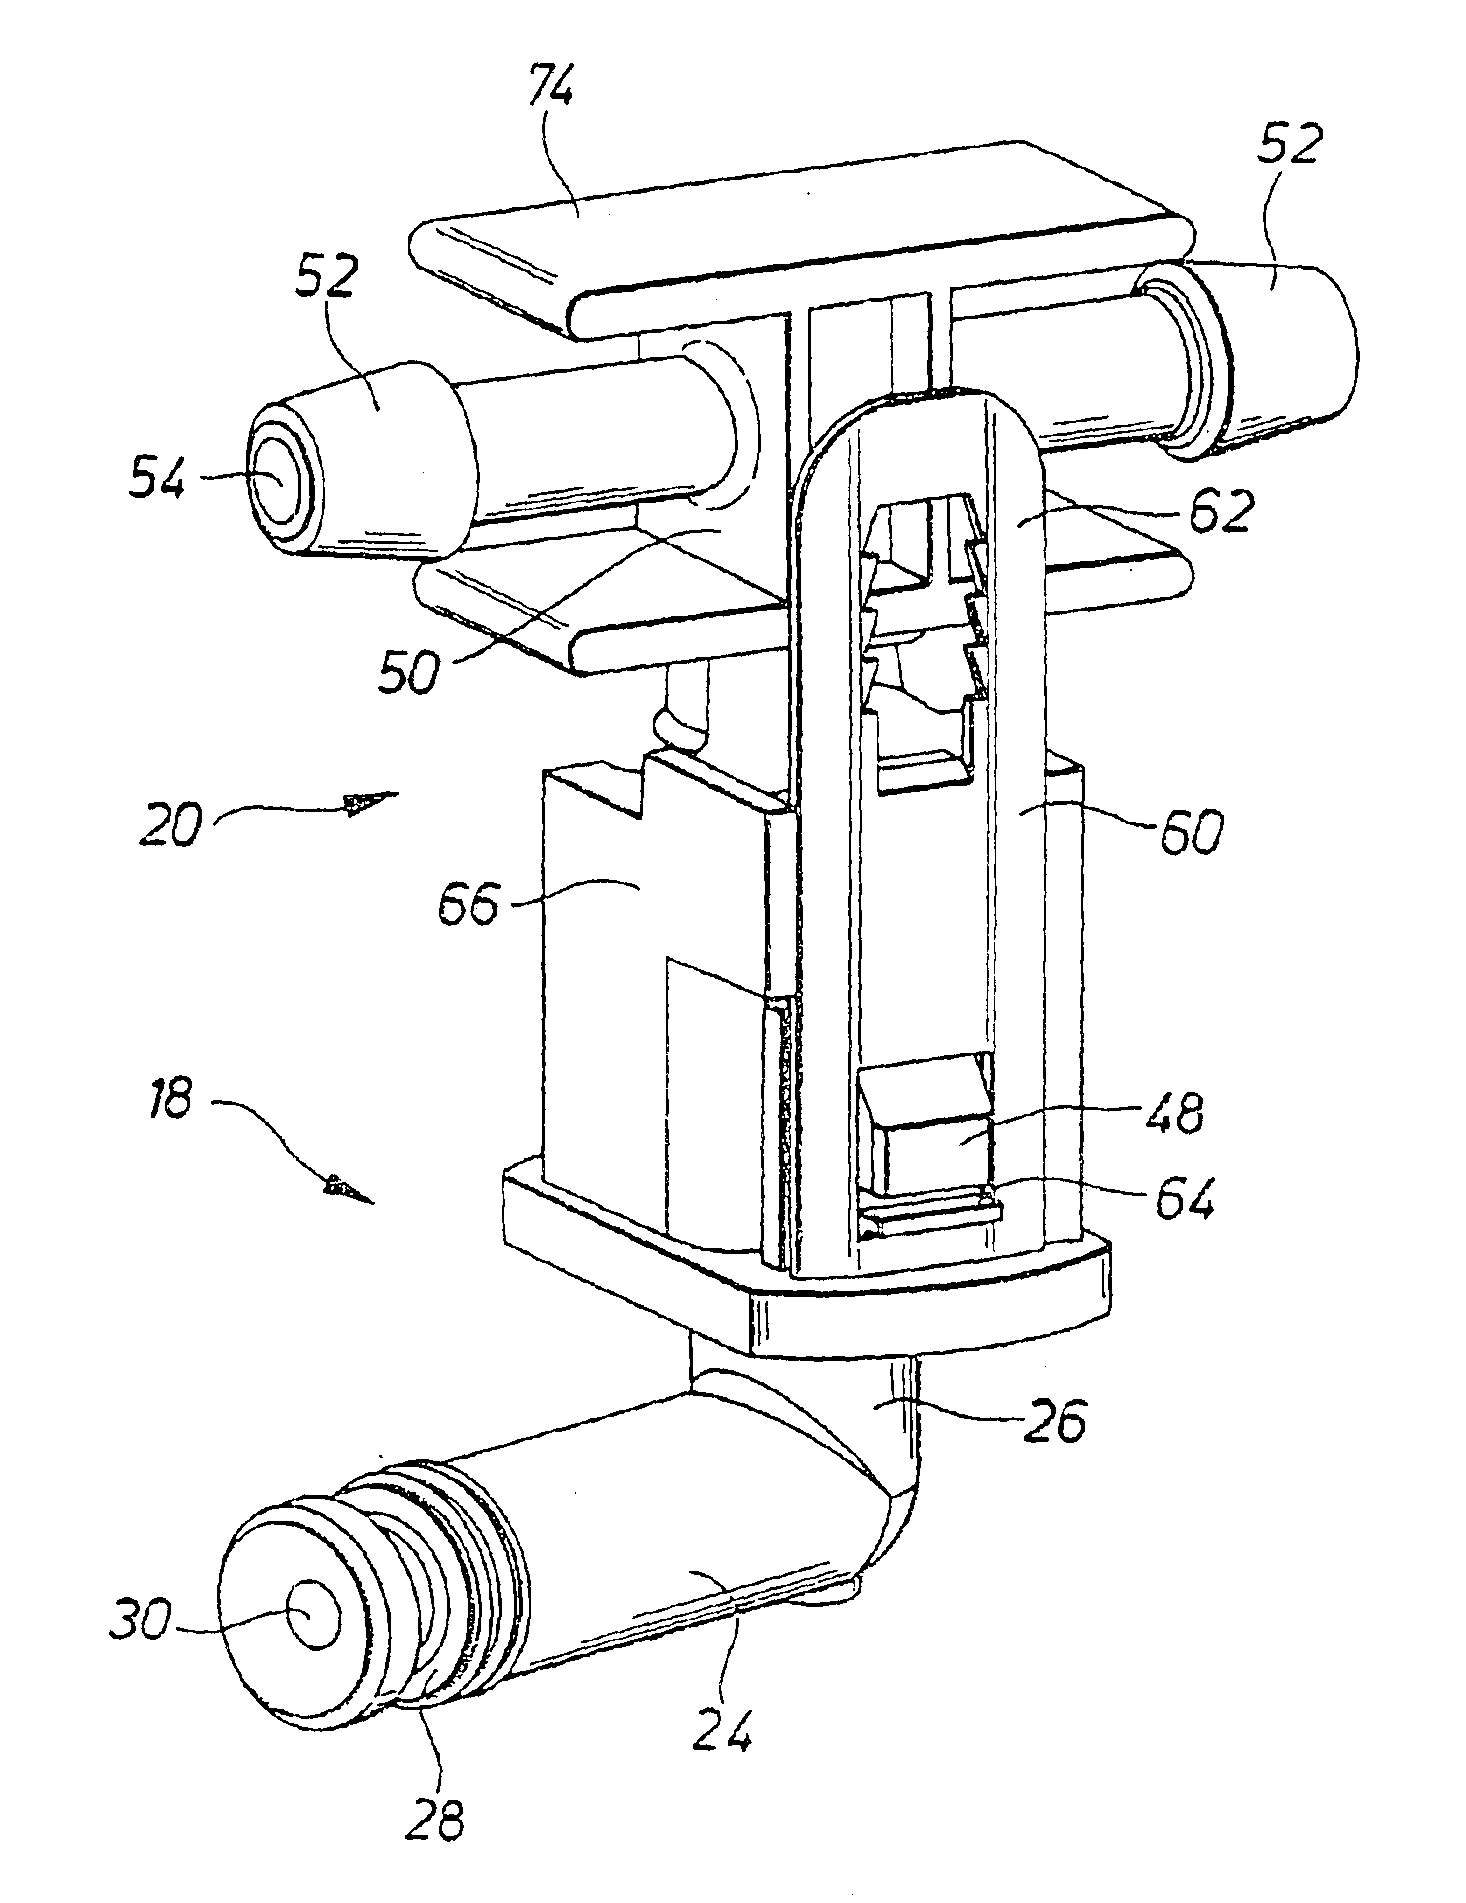 Fuel injection device for internal combustion engines, in particular a common rail injector